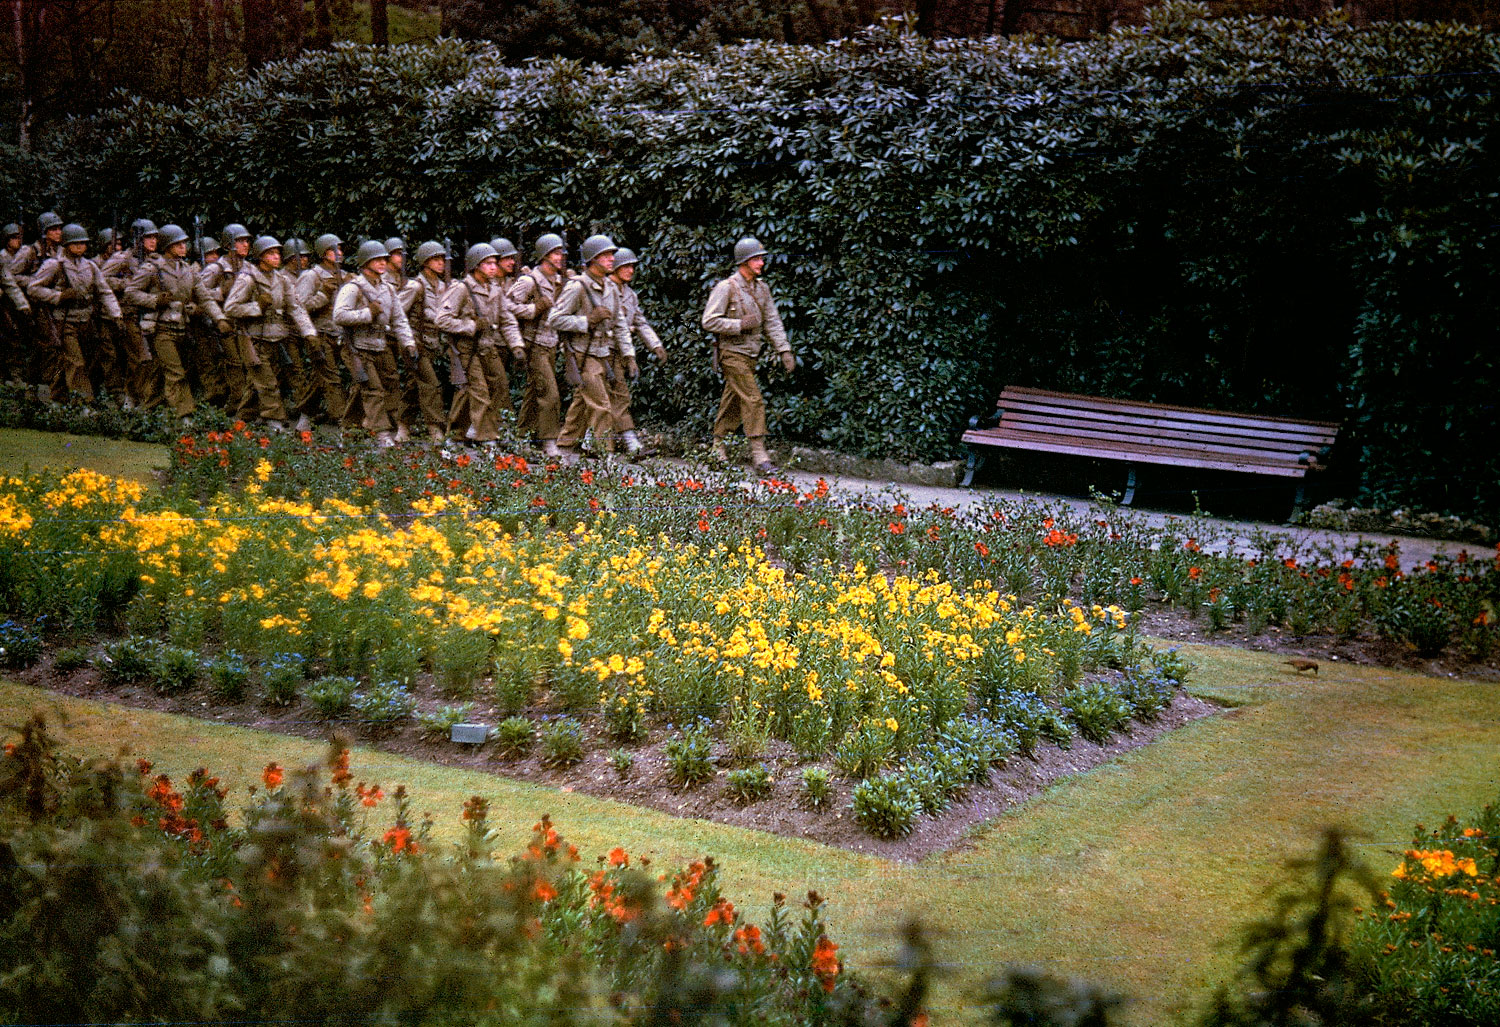 American troops in England before D-Day